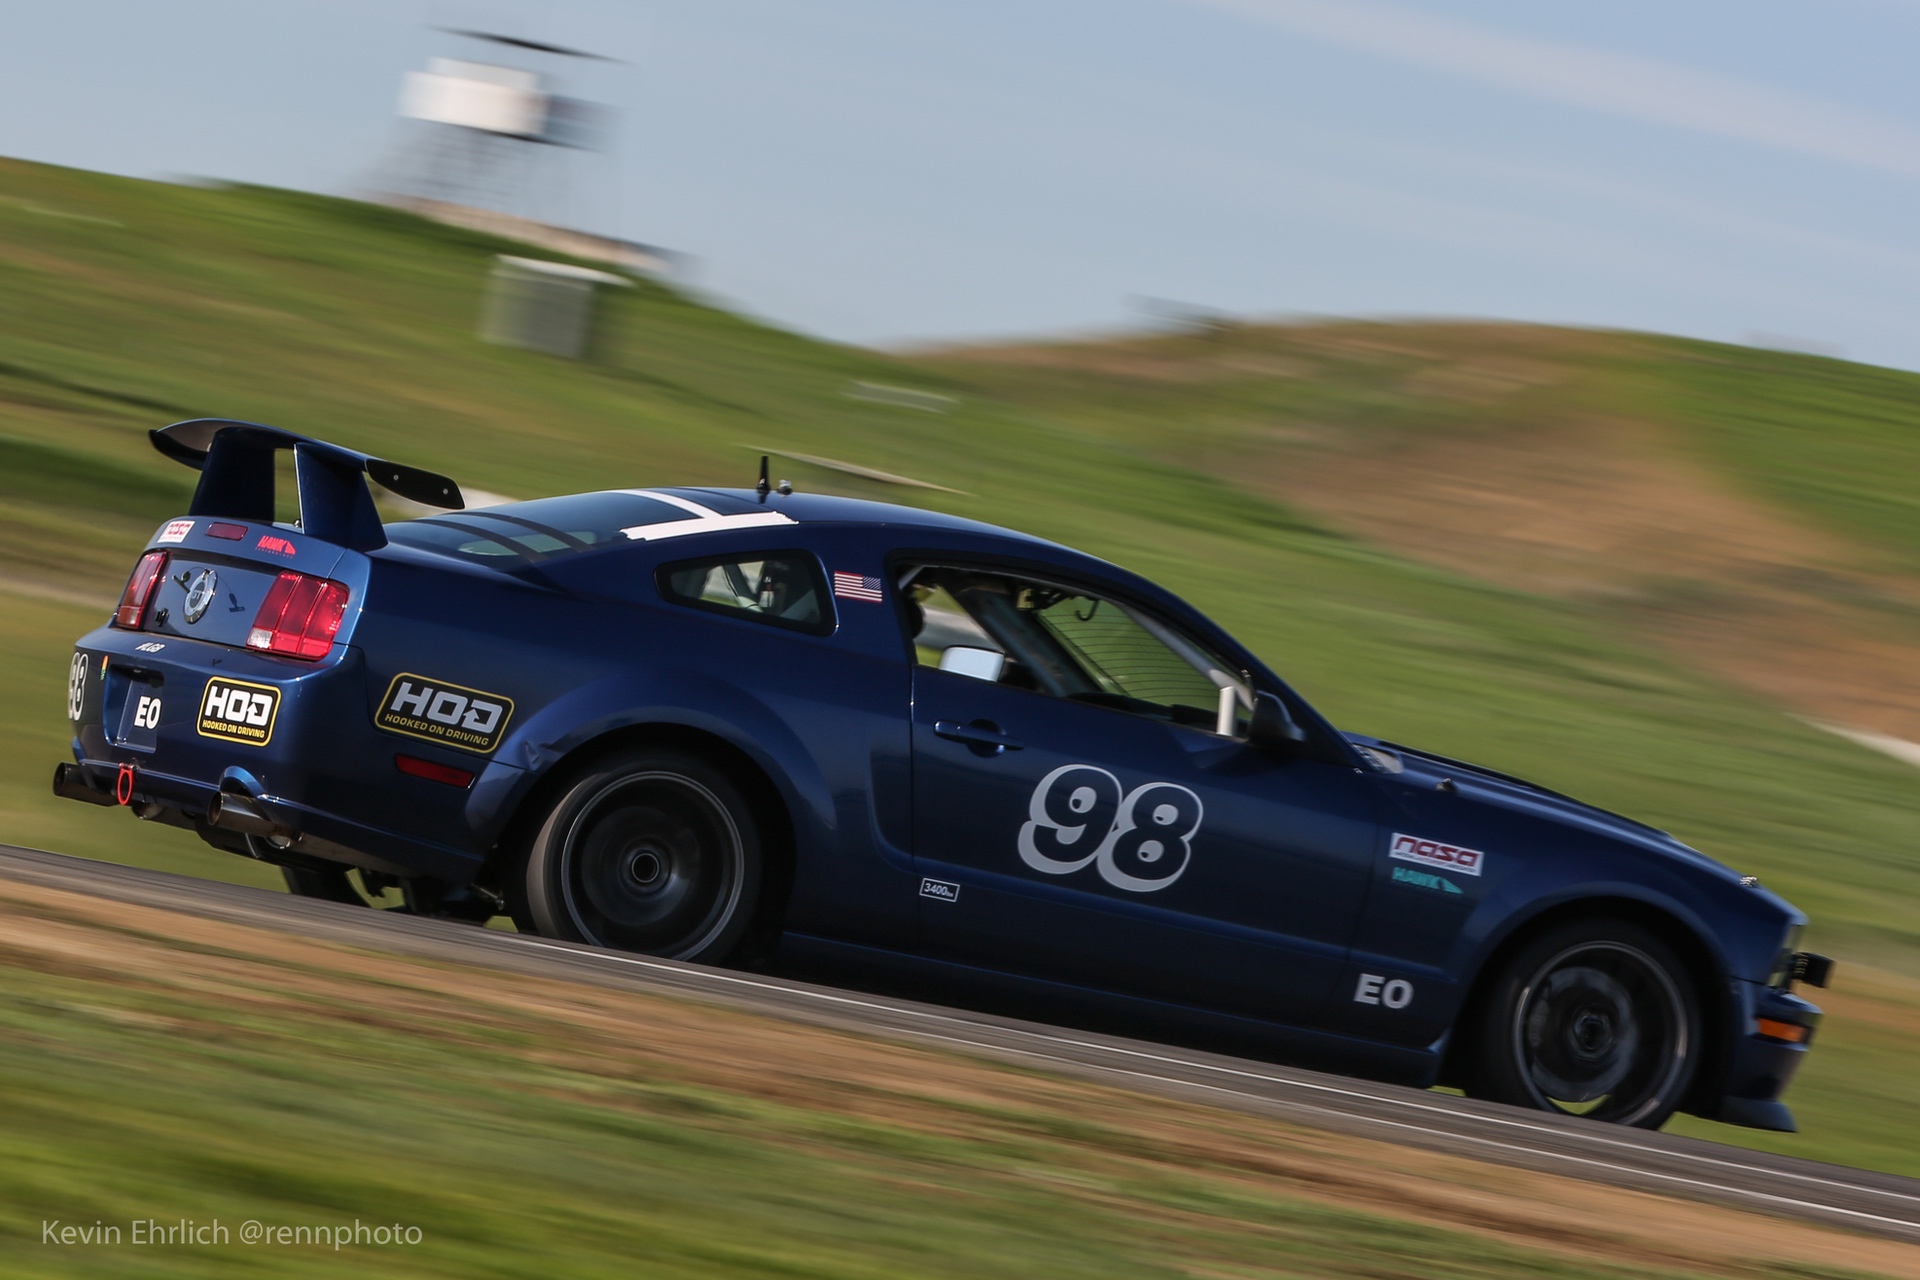 2008 Ford Mustang on track at Thunderhill 2021